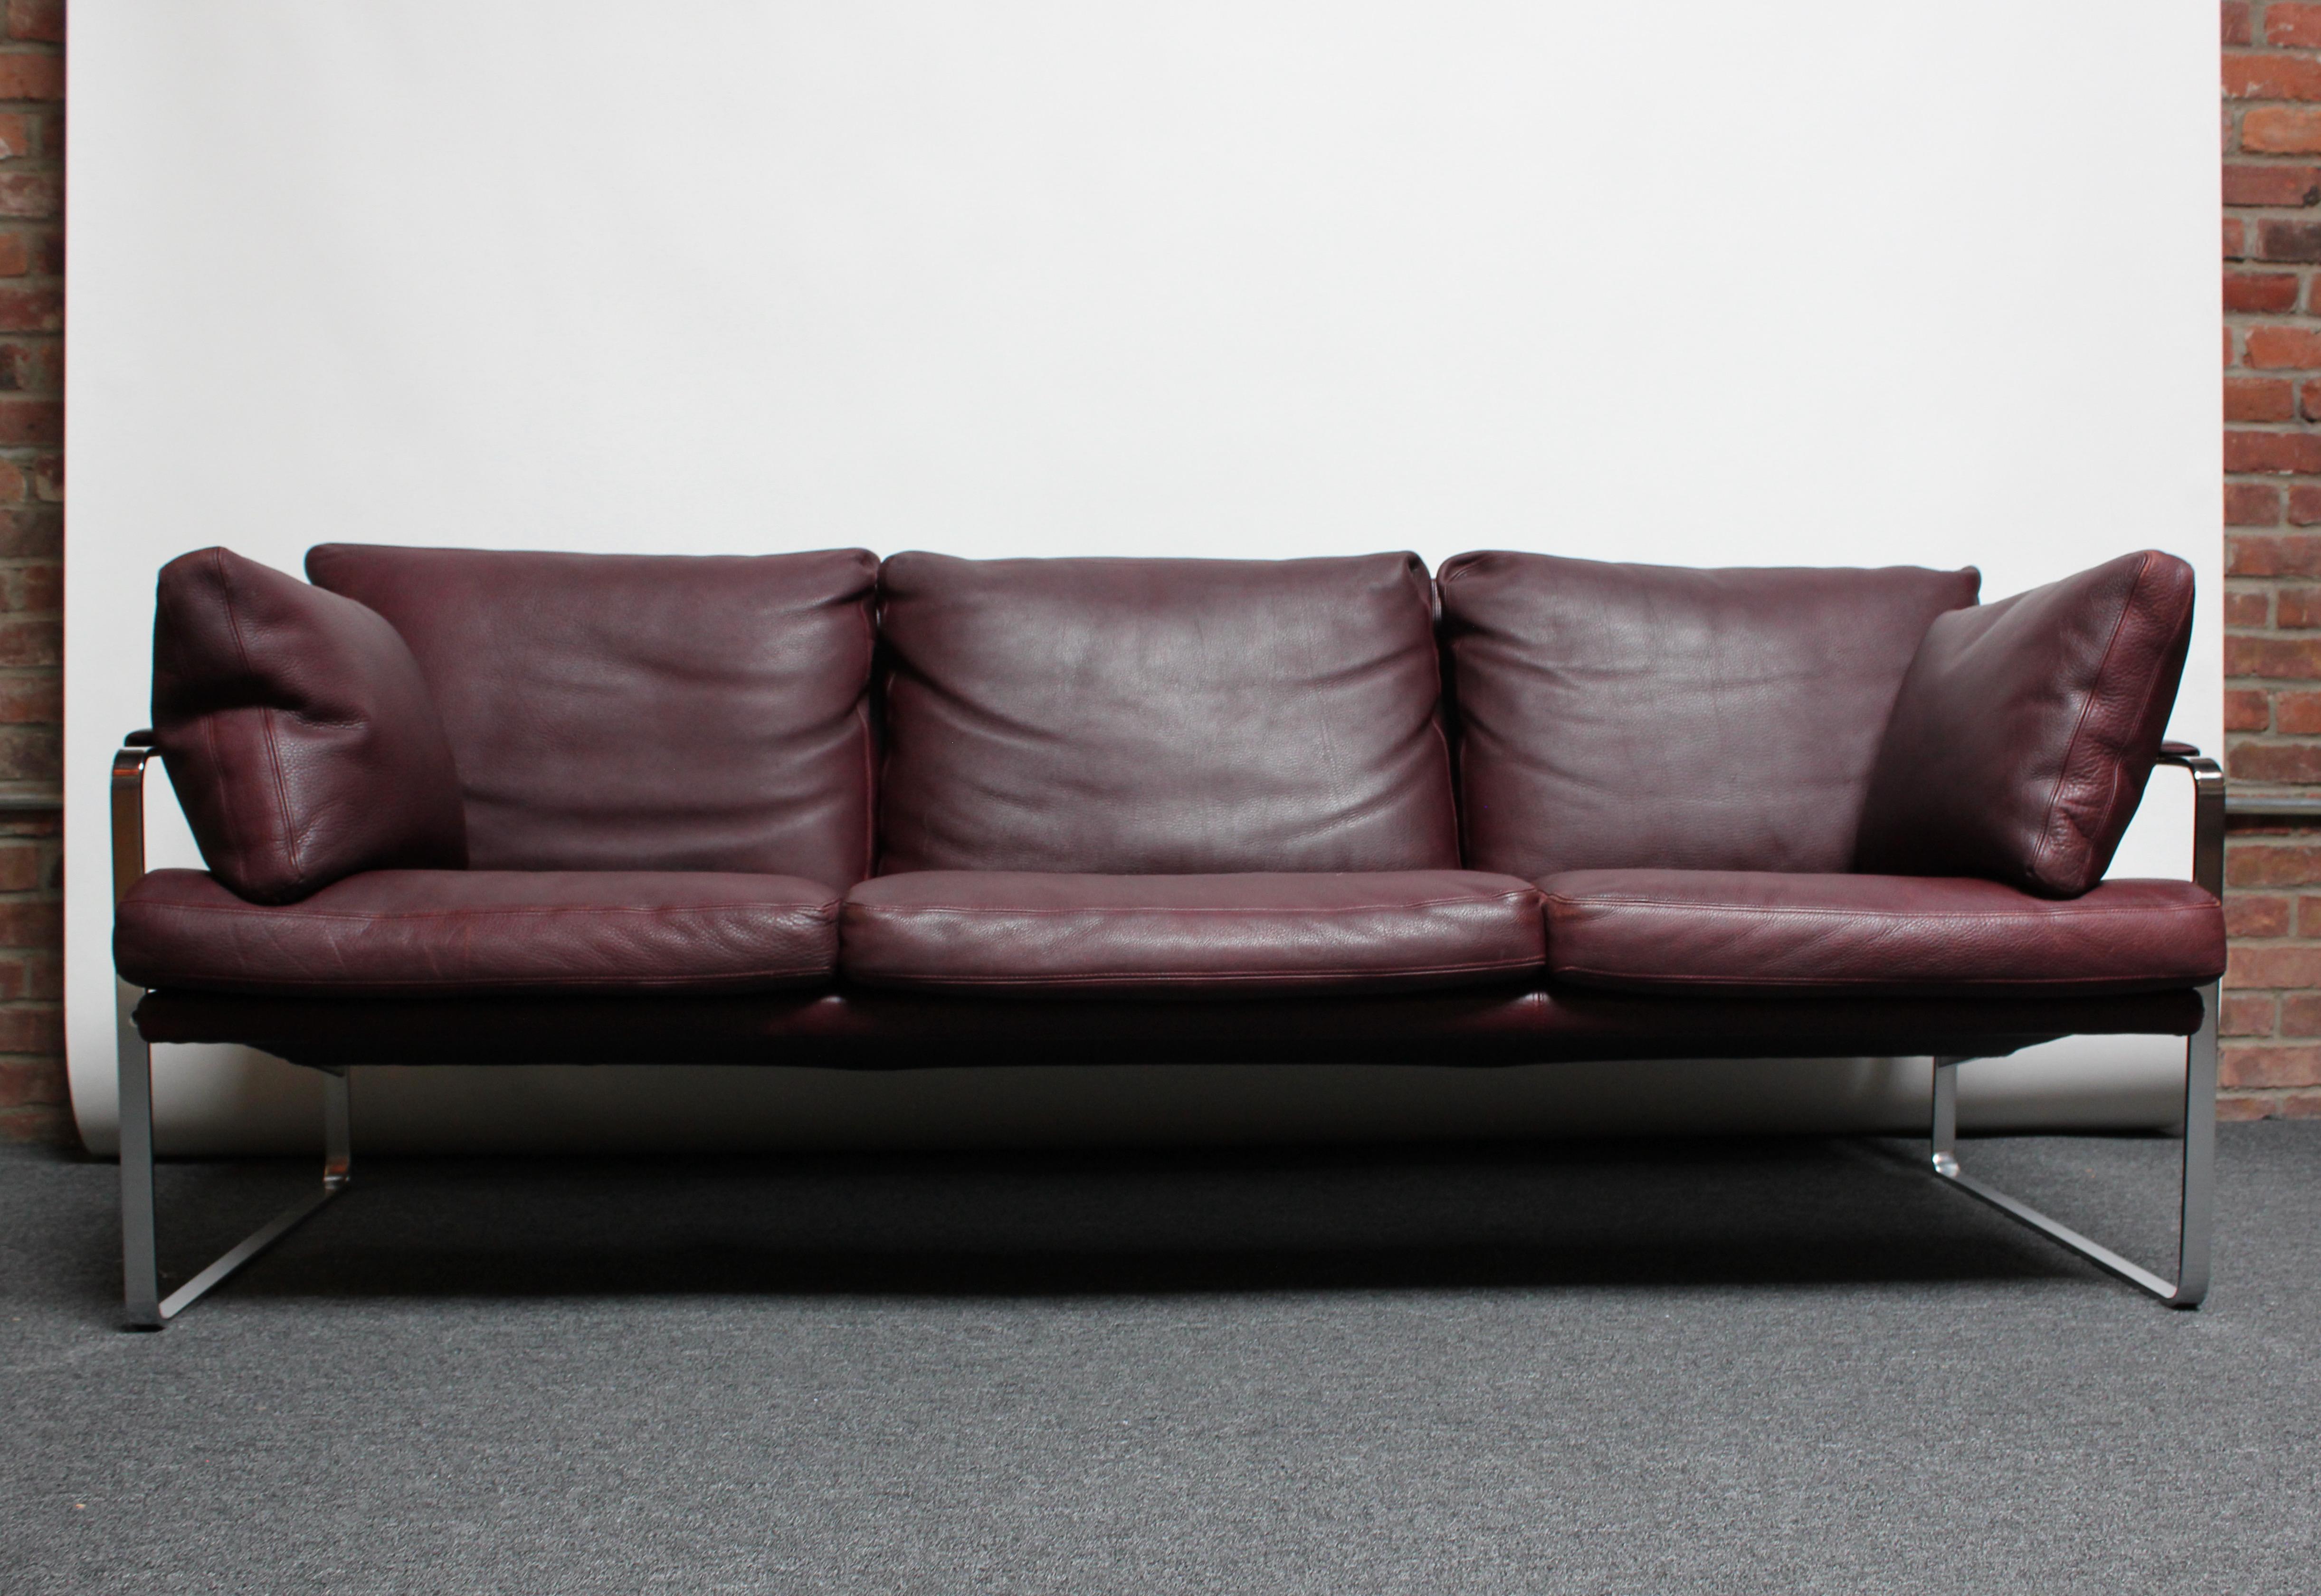 Three-seater sofa designed as part of the 